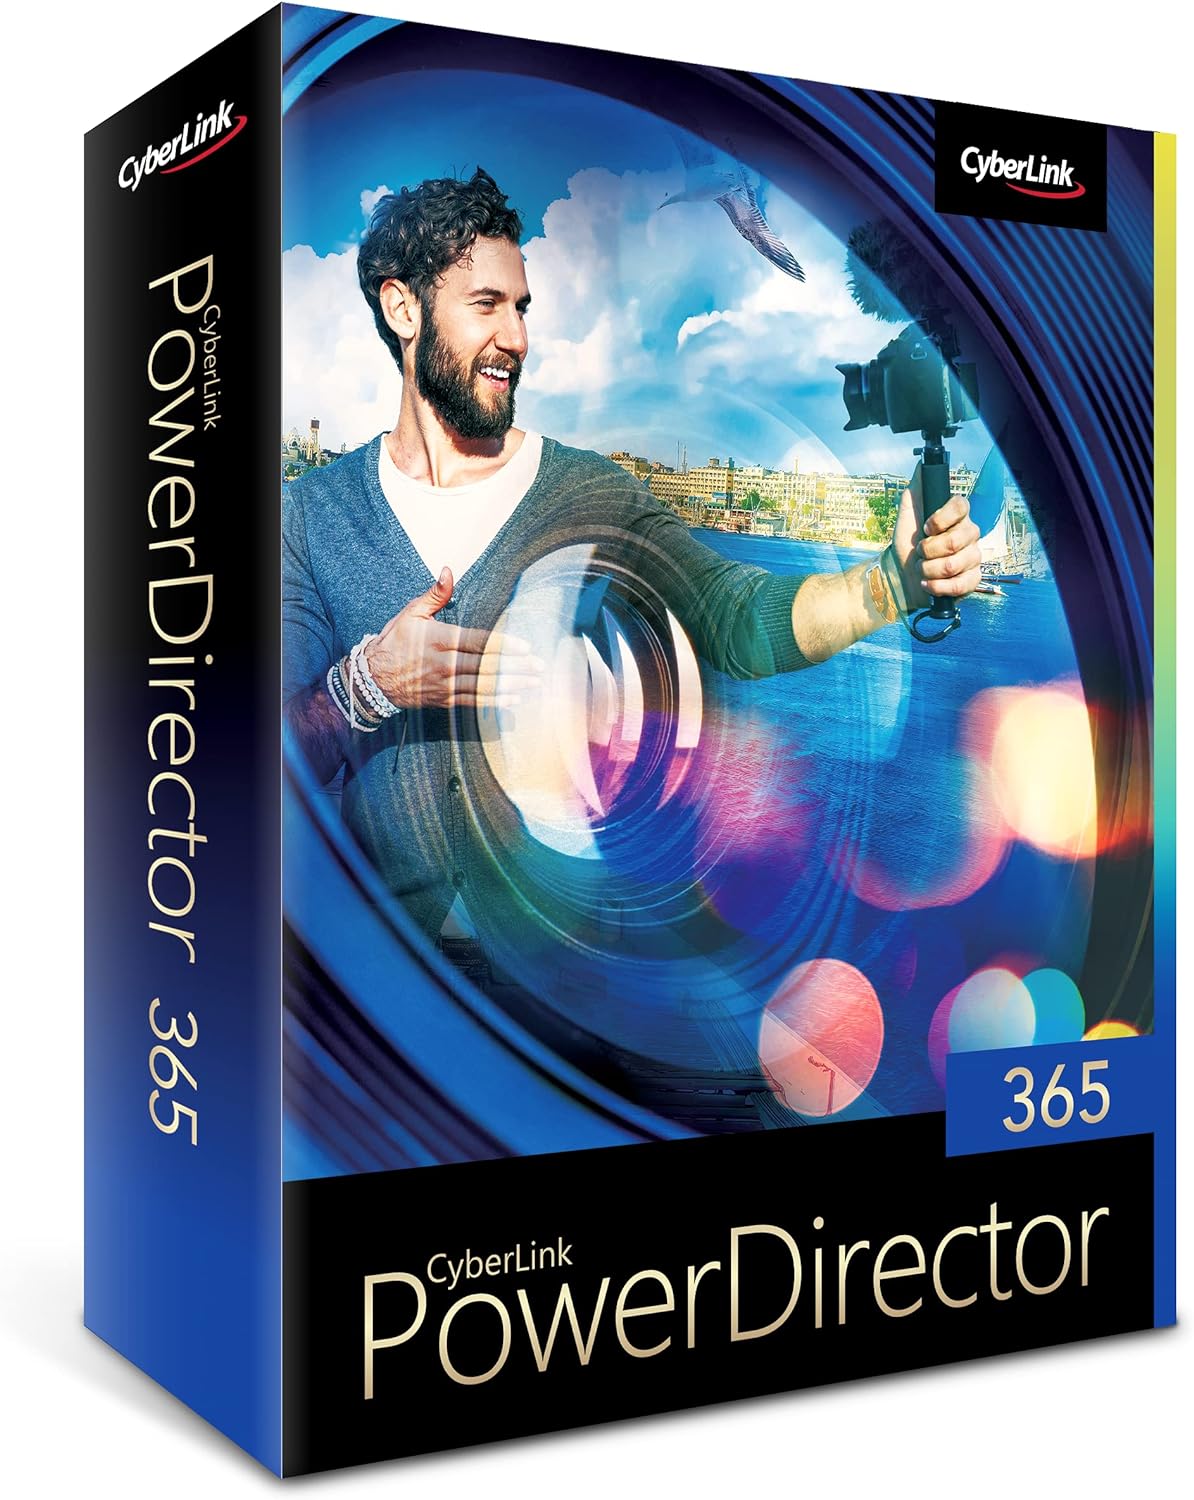 The PowerDirector 365 bundle, including CyberLink PowerDirector Ultimate Crack, is now available for purchase.